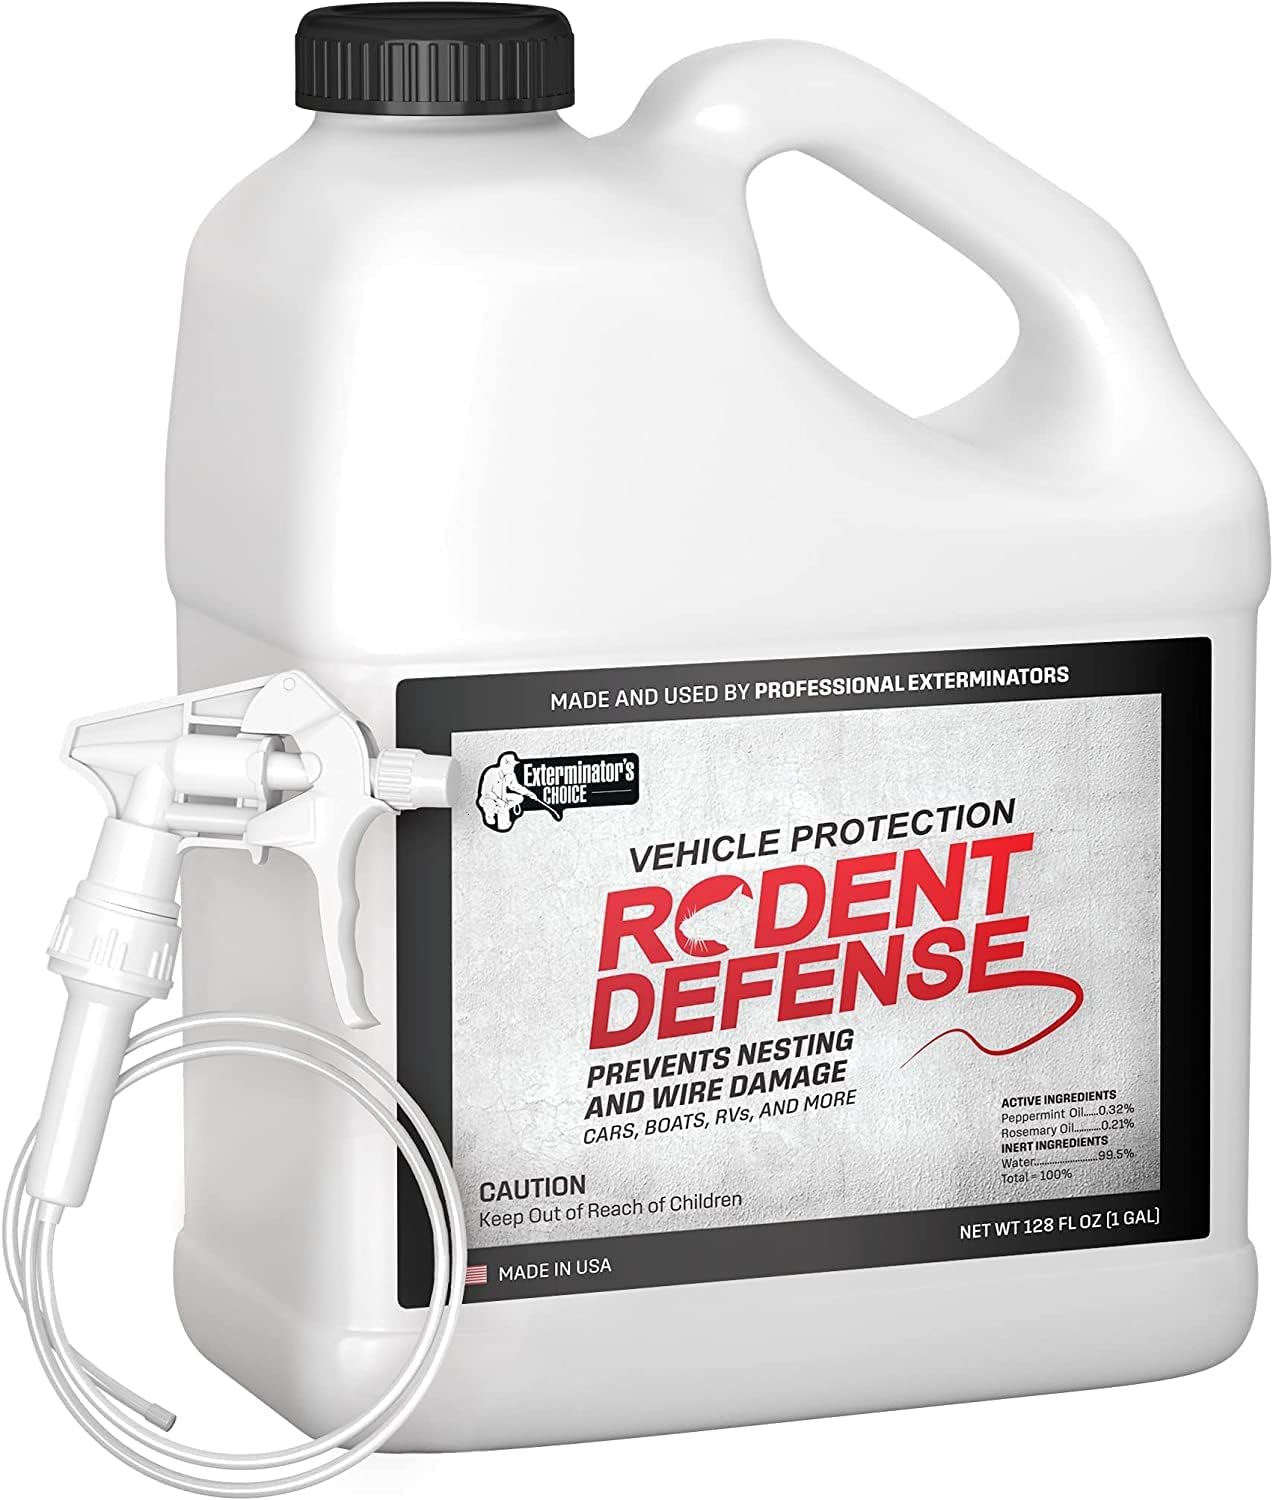 Exterminators Choice - Rodent Defense Spray for Cars [...]